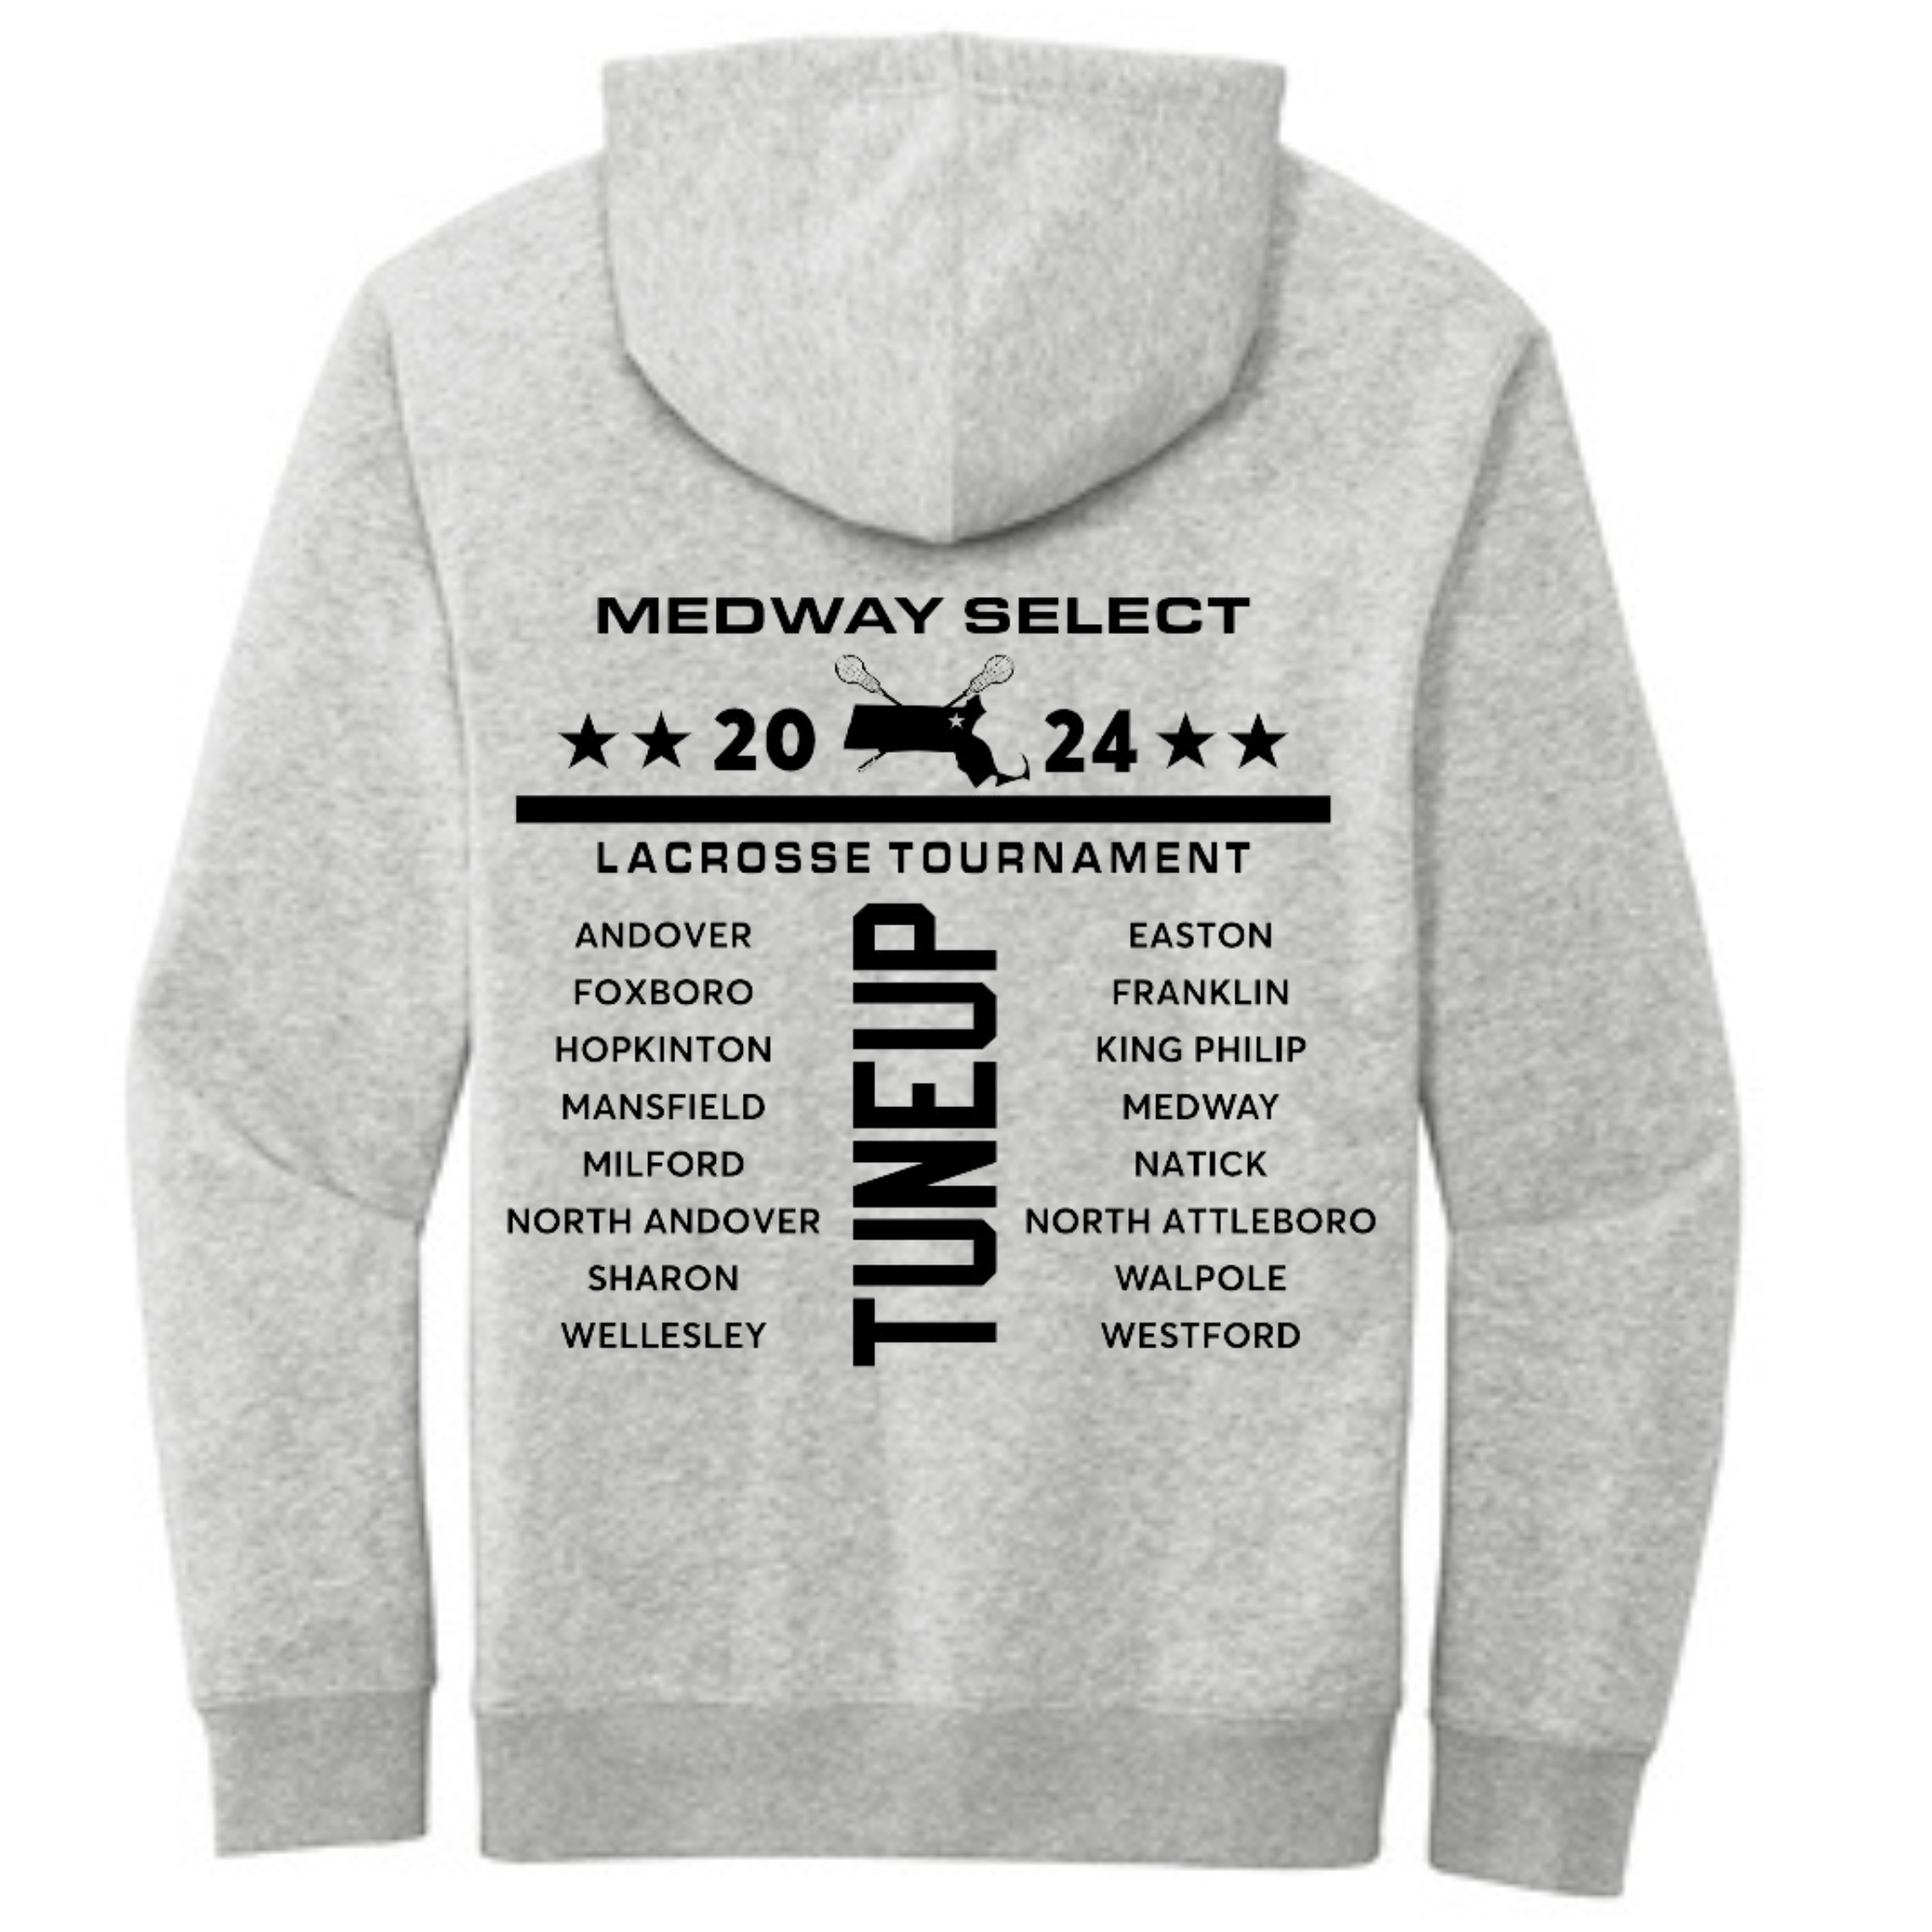 TUNEUP TOURNAMENT SELECT LACROSSE YOUTH HOODIE WITH TOWNS - GRAY